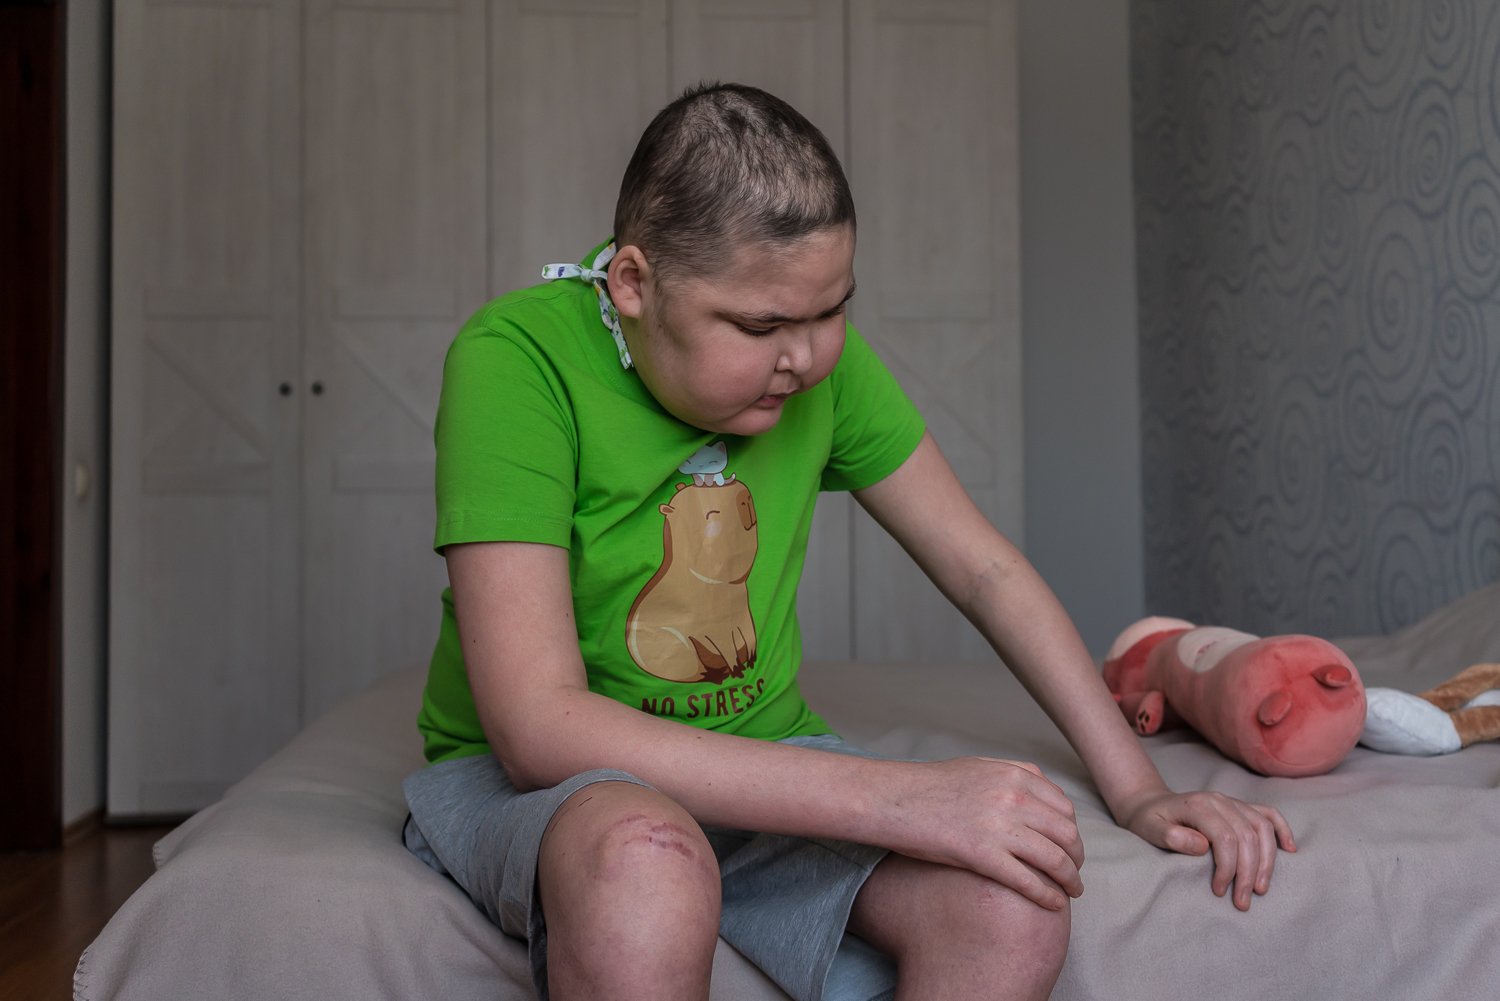  Sasha Batanov, 14, who is being treated at Okhmadyt Children's Hospital for leukemia, on Wednesday, June 21, 2023 in Kyiv, Ukraine. Sasha is from Kharkiv, and his family believes his cancer would have been found sooner if their doctor’s visits had n